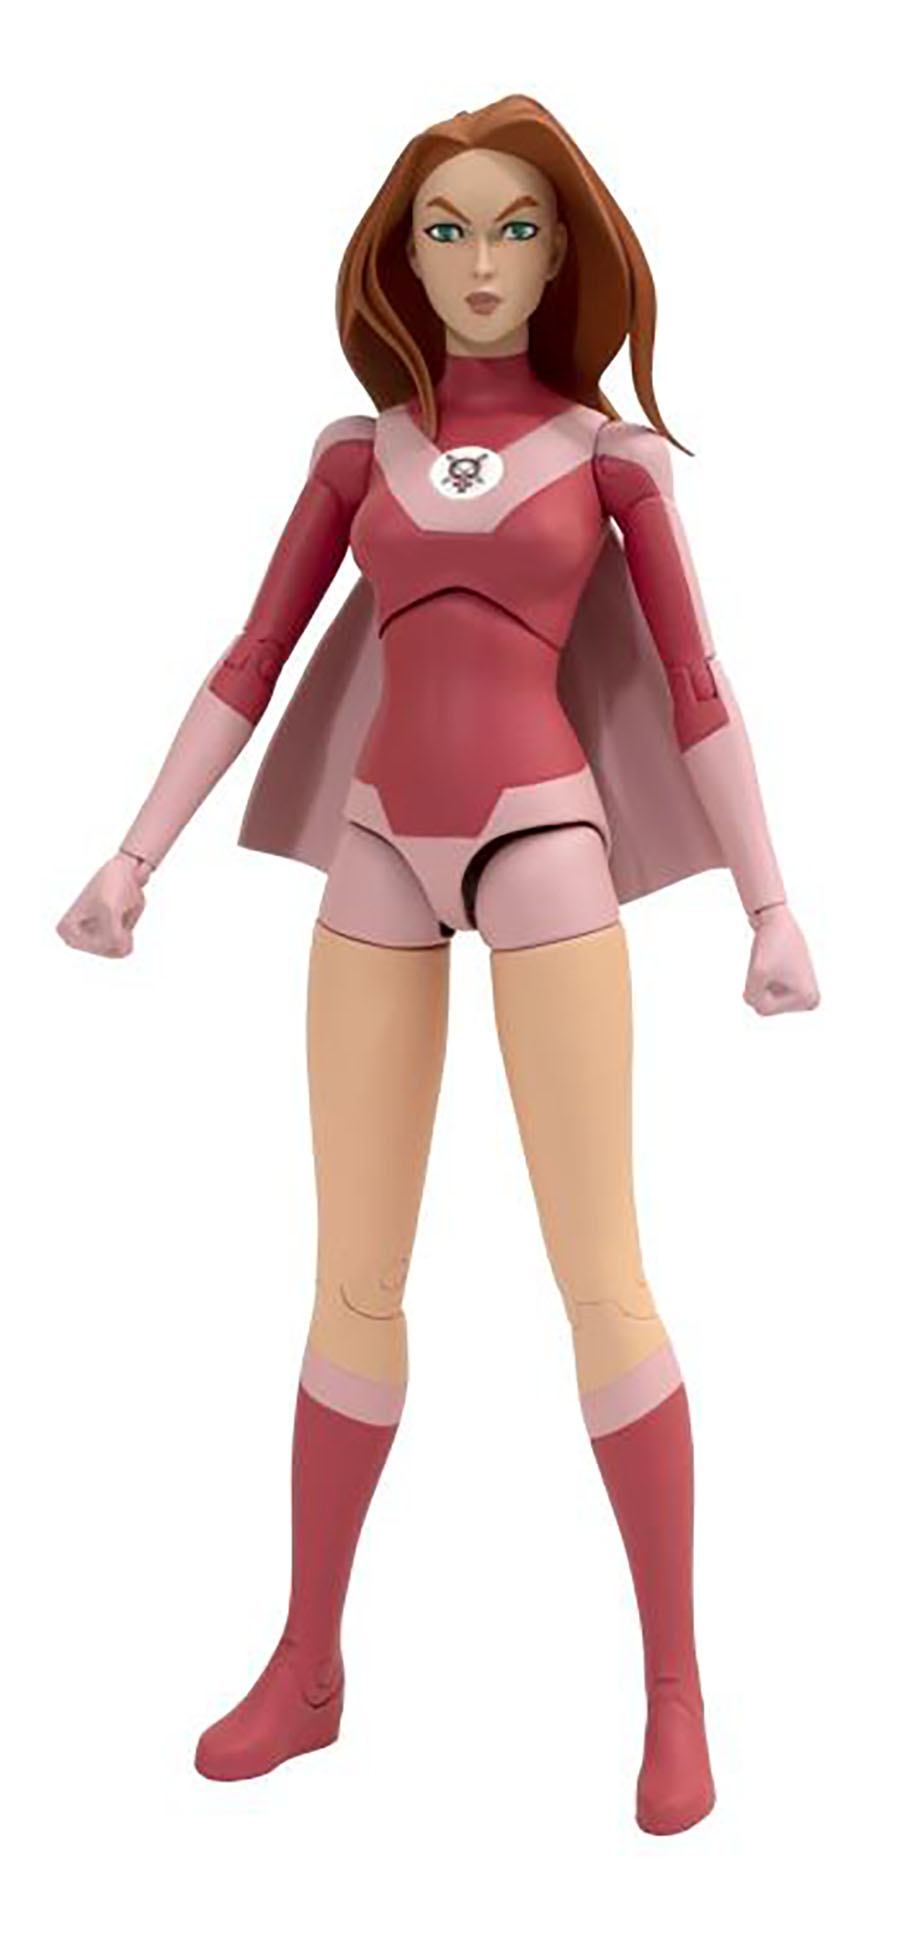 Invincible Animation Deluxe Action Figure Series 2 - Atom Eve